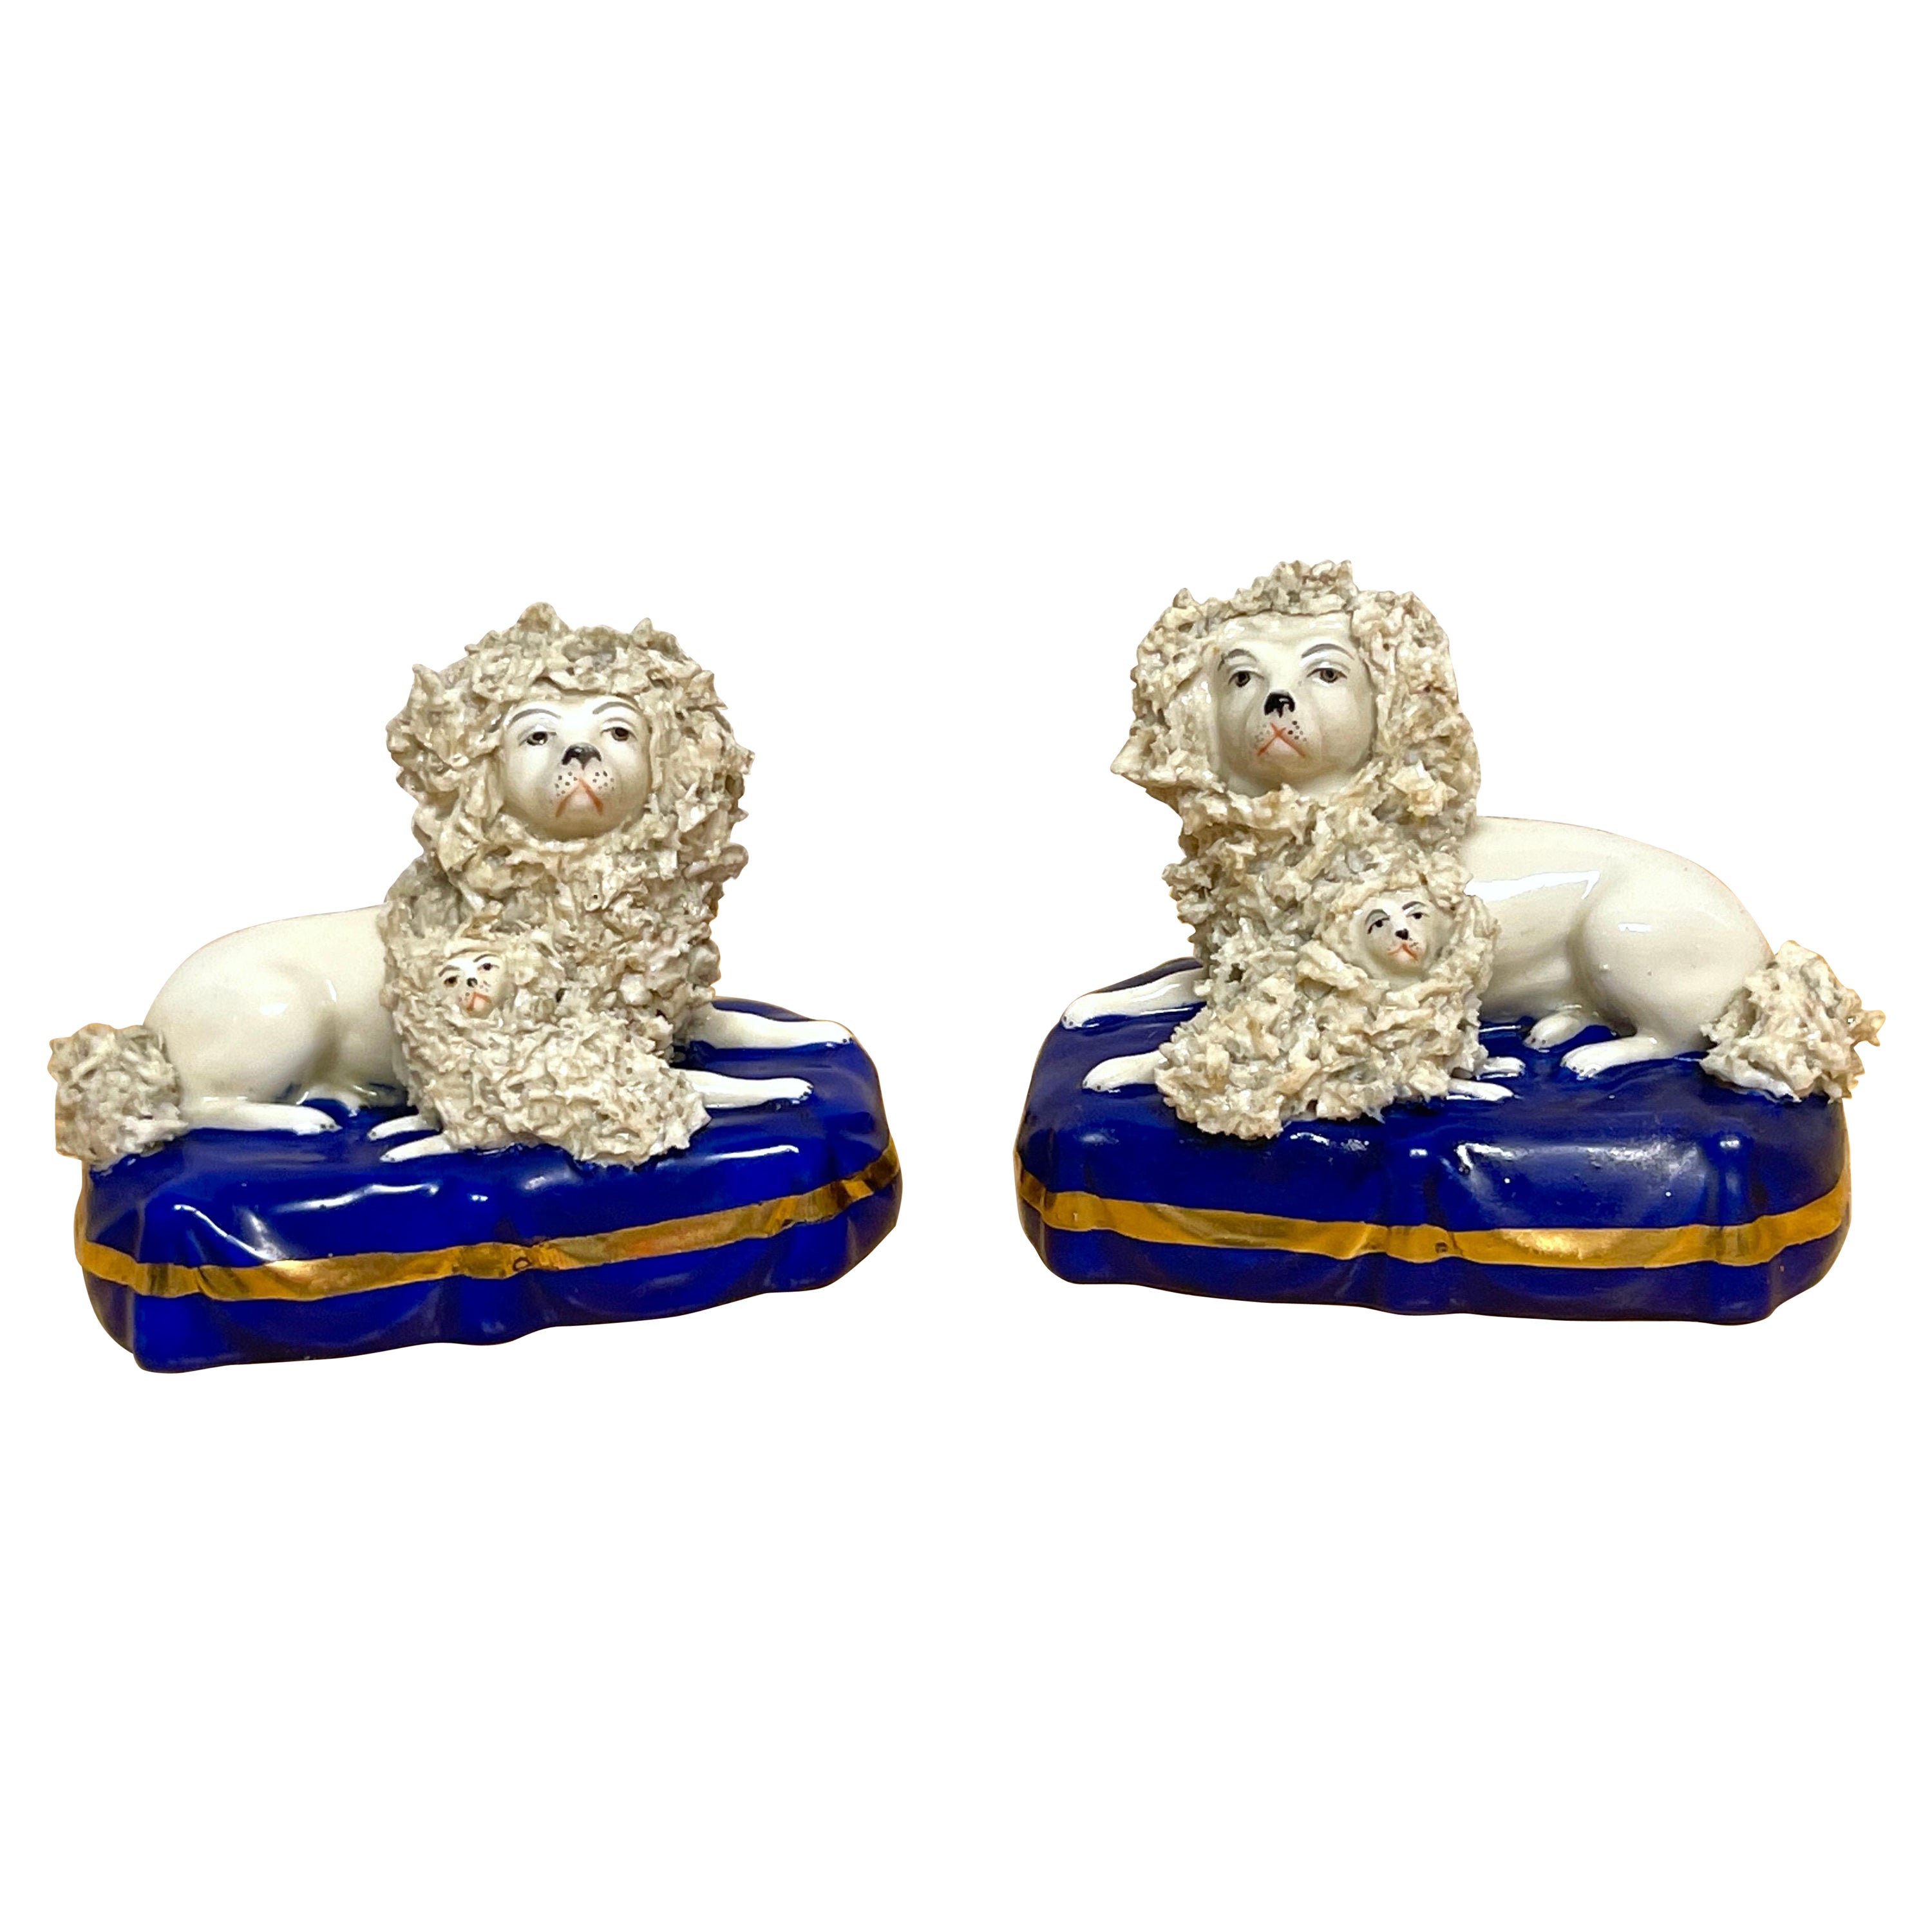 Pair of 19th Century Chelsea Porcelain Figures of Seated Poodles & Pups For Sale